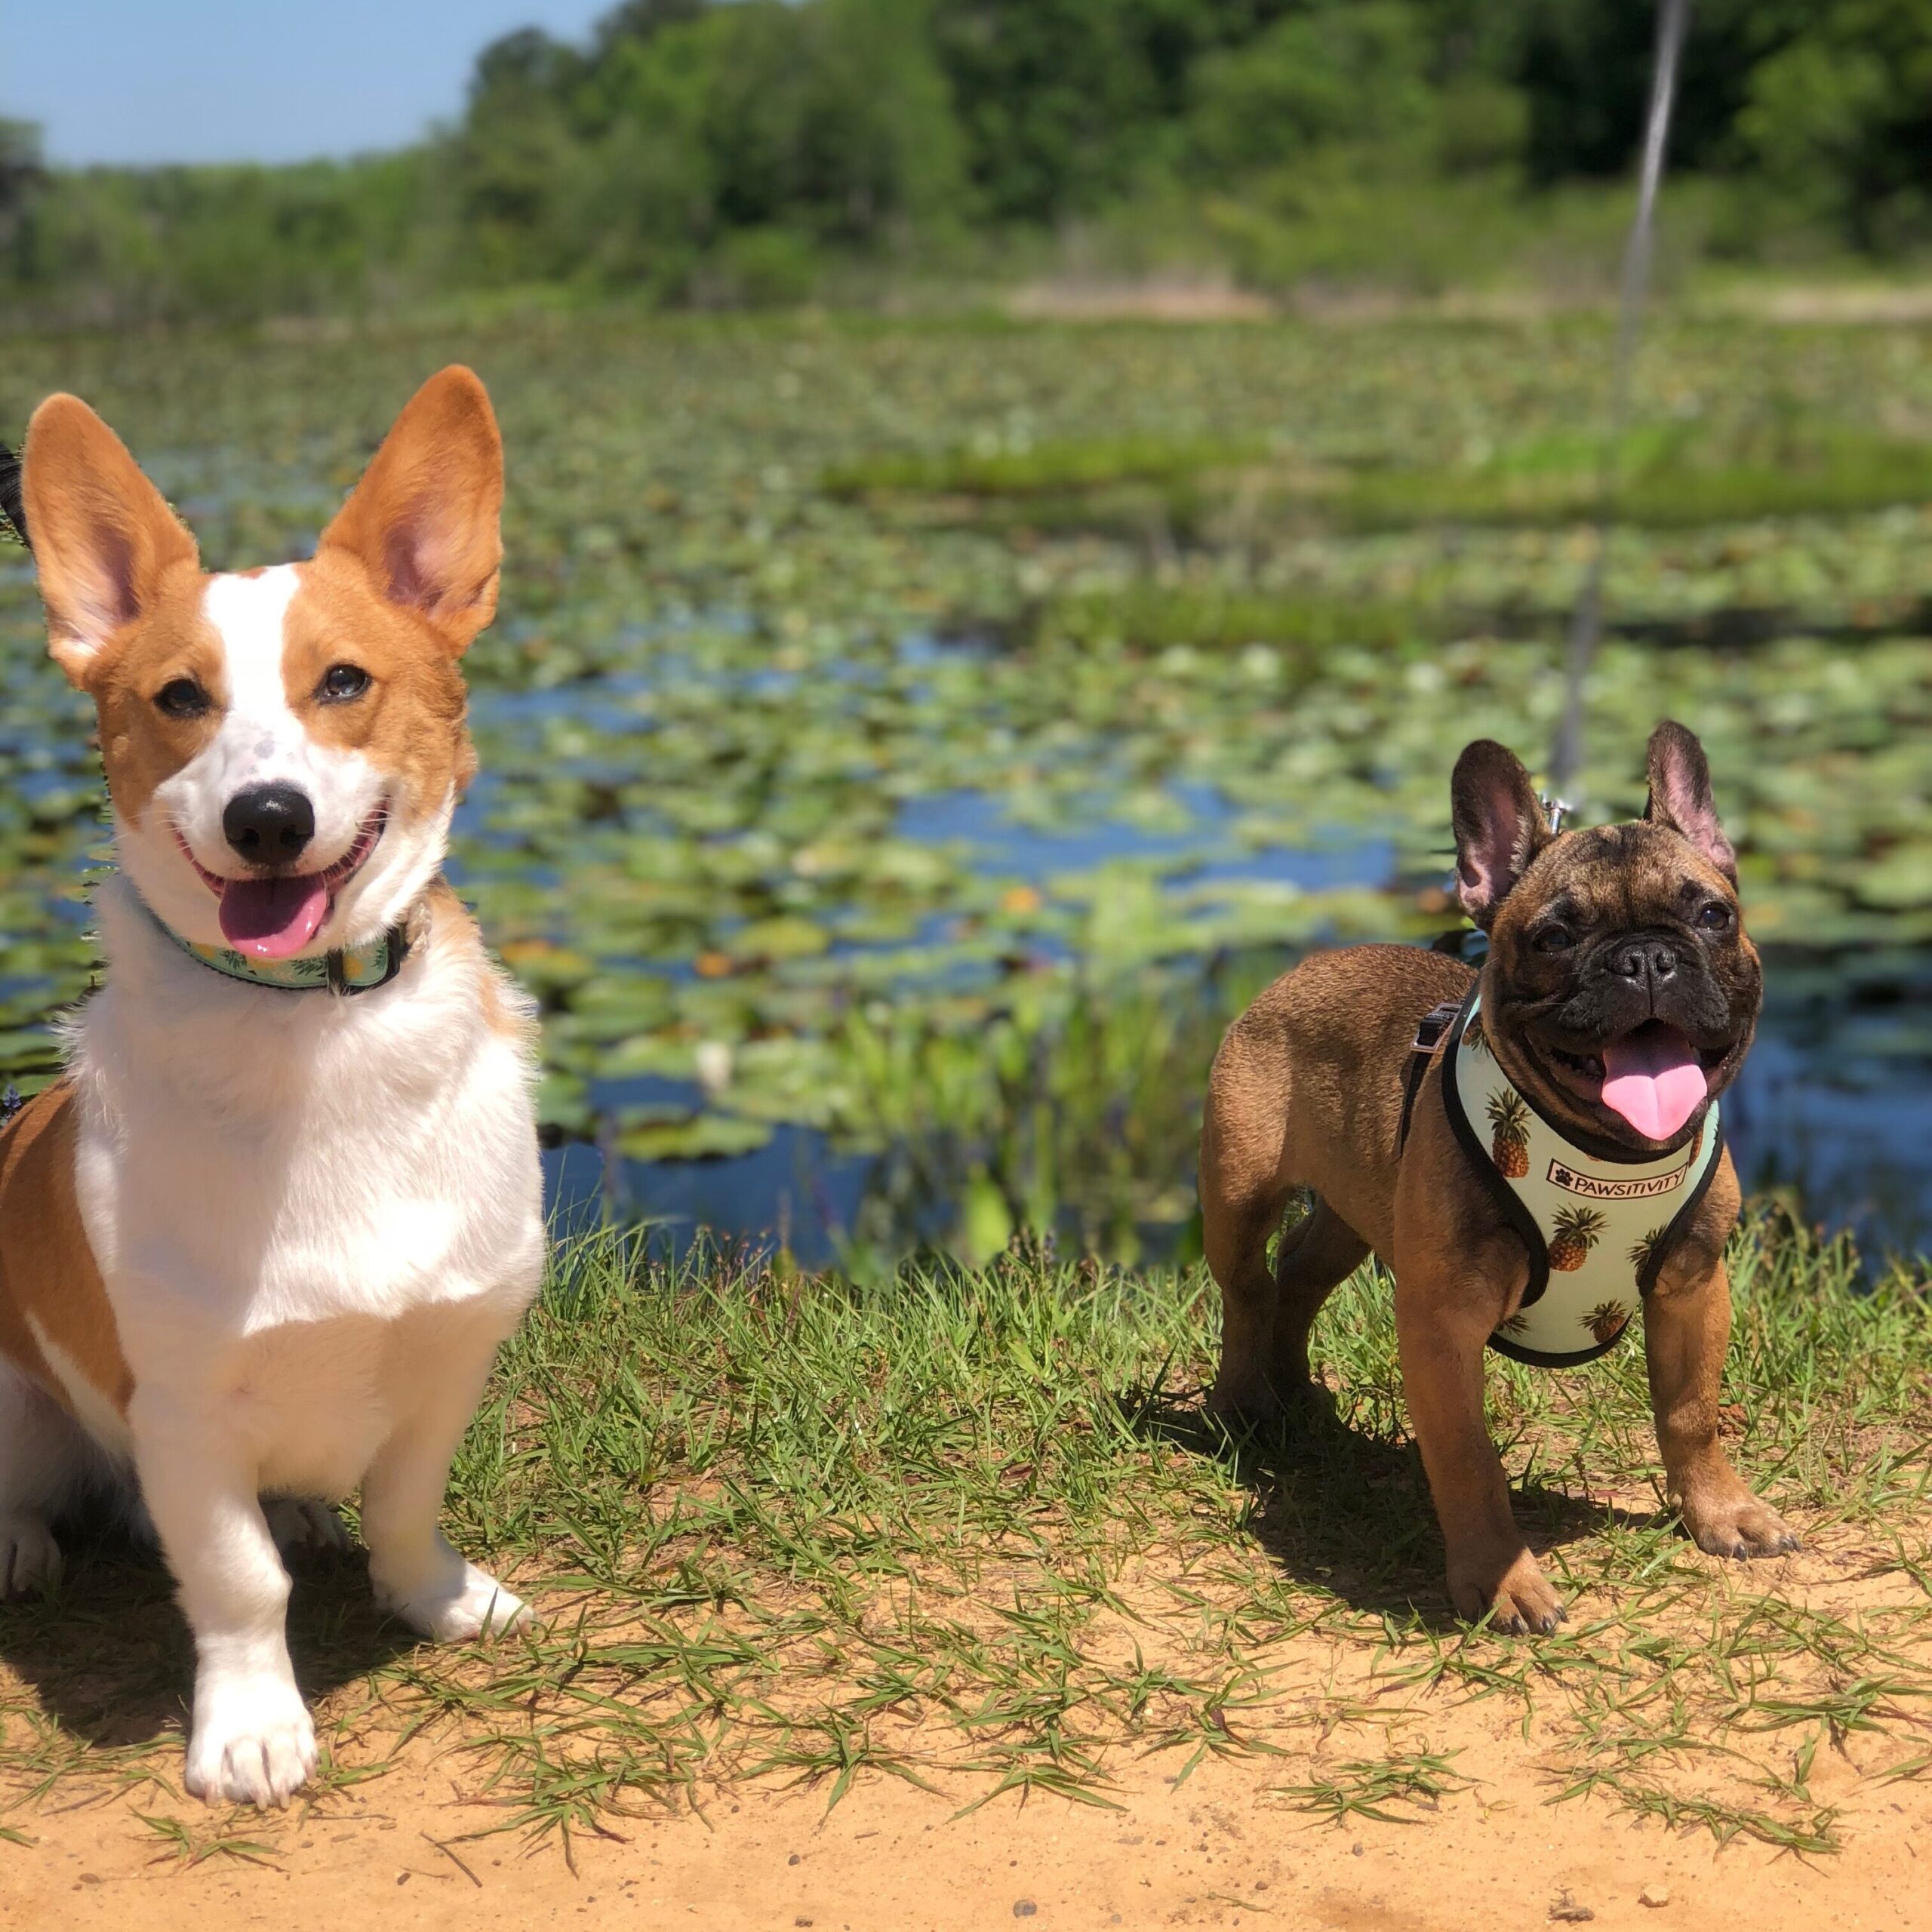 A picture of a french bulldog meeting a corgi